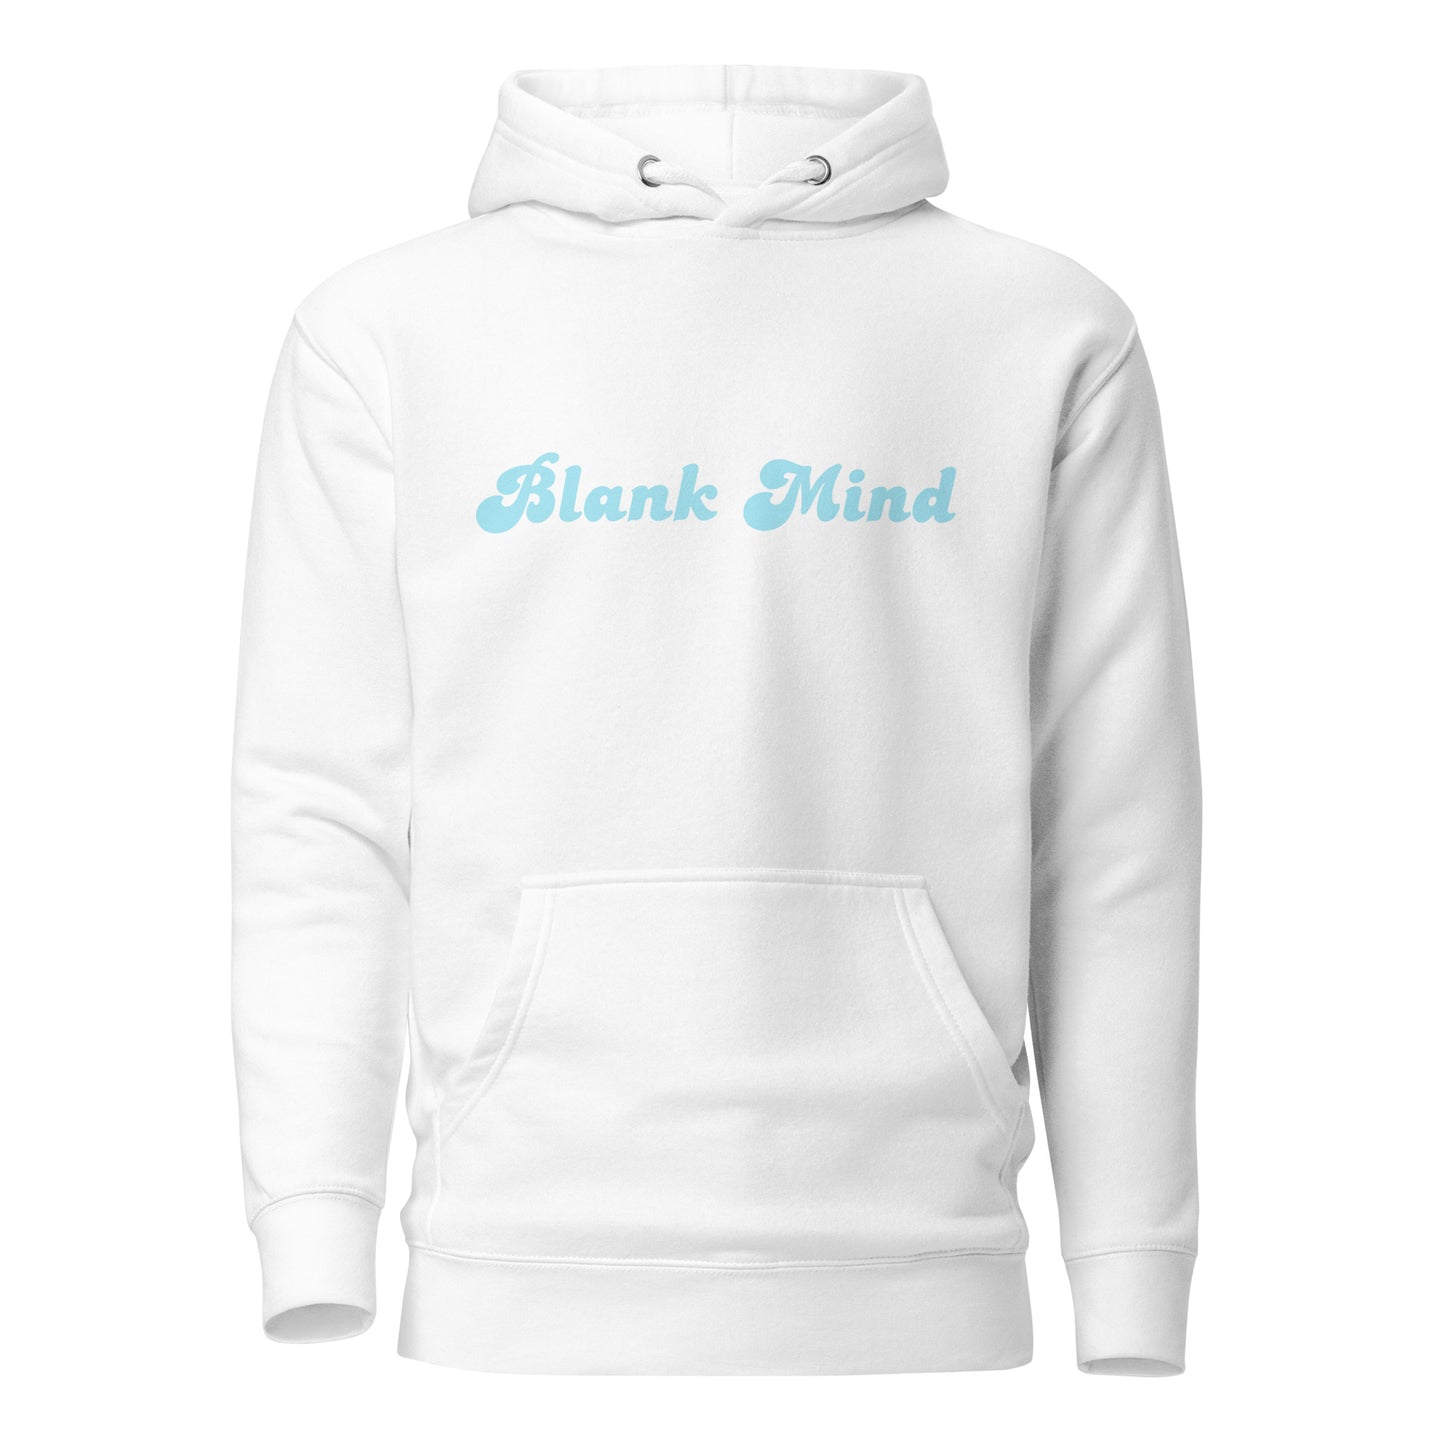 Blank Mind How's The View Hoodie